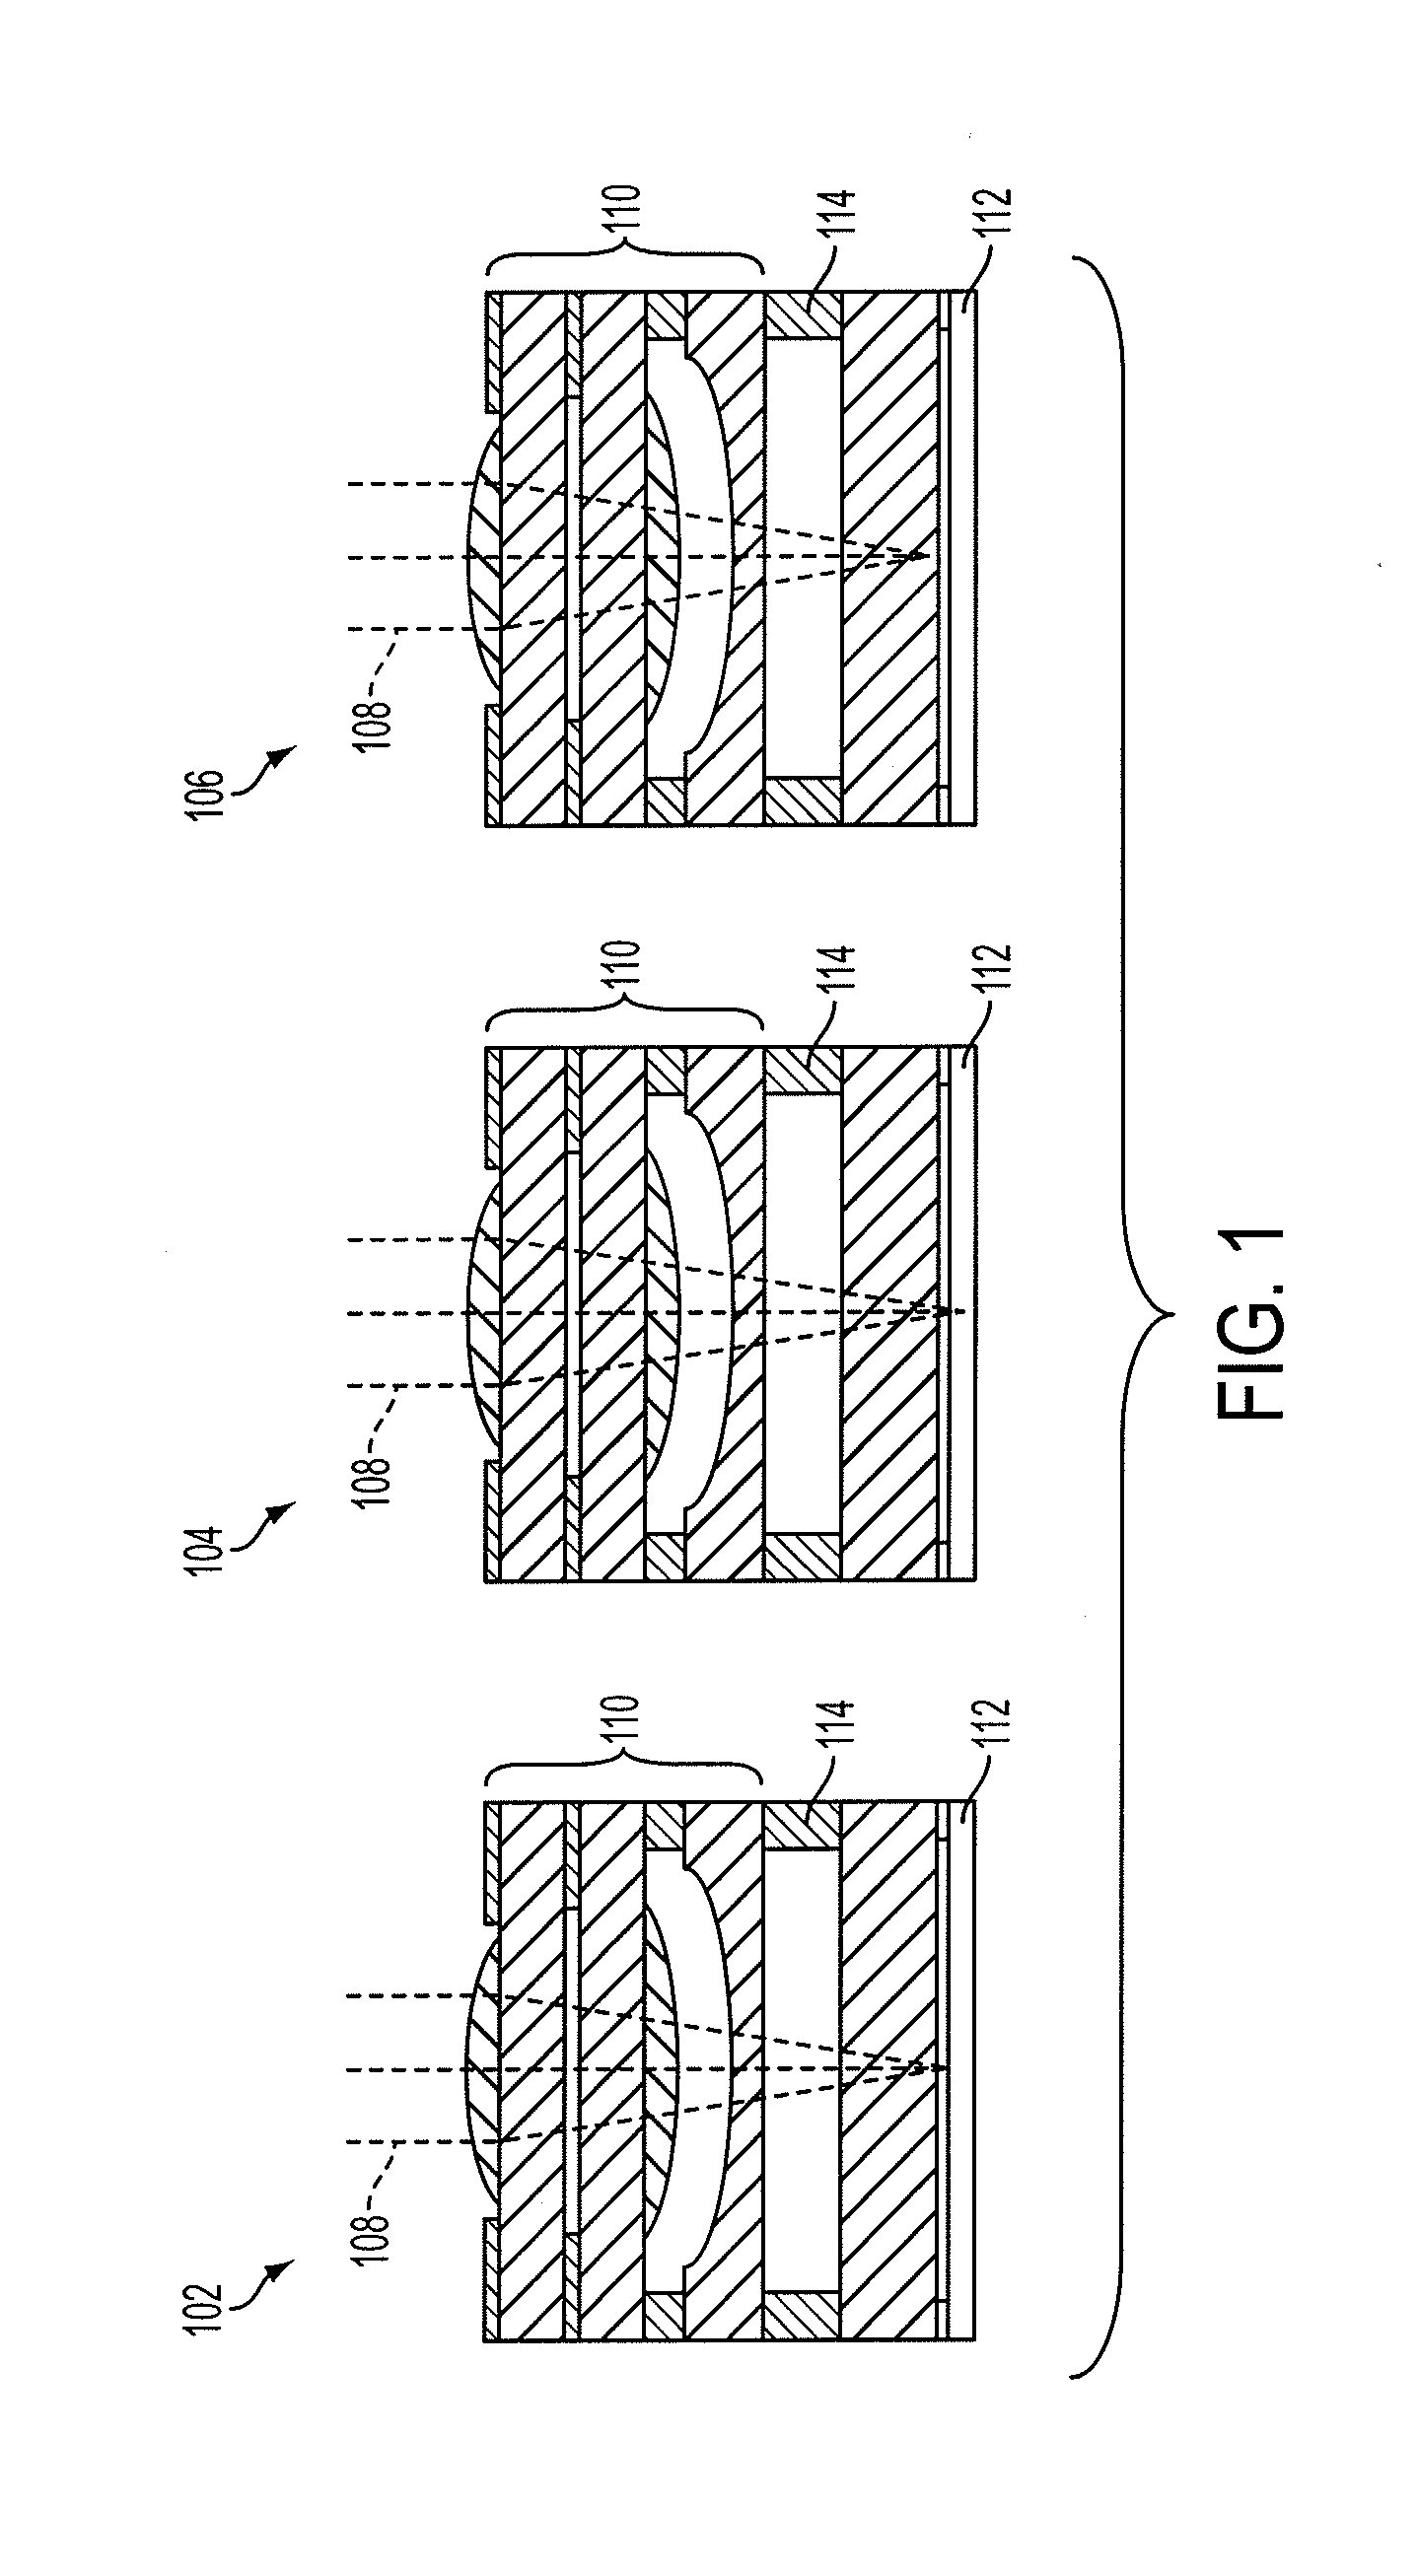 Focus Compensation For Optical Elements And Applications Thereof